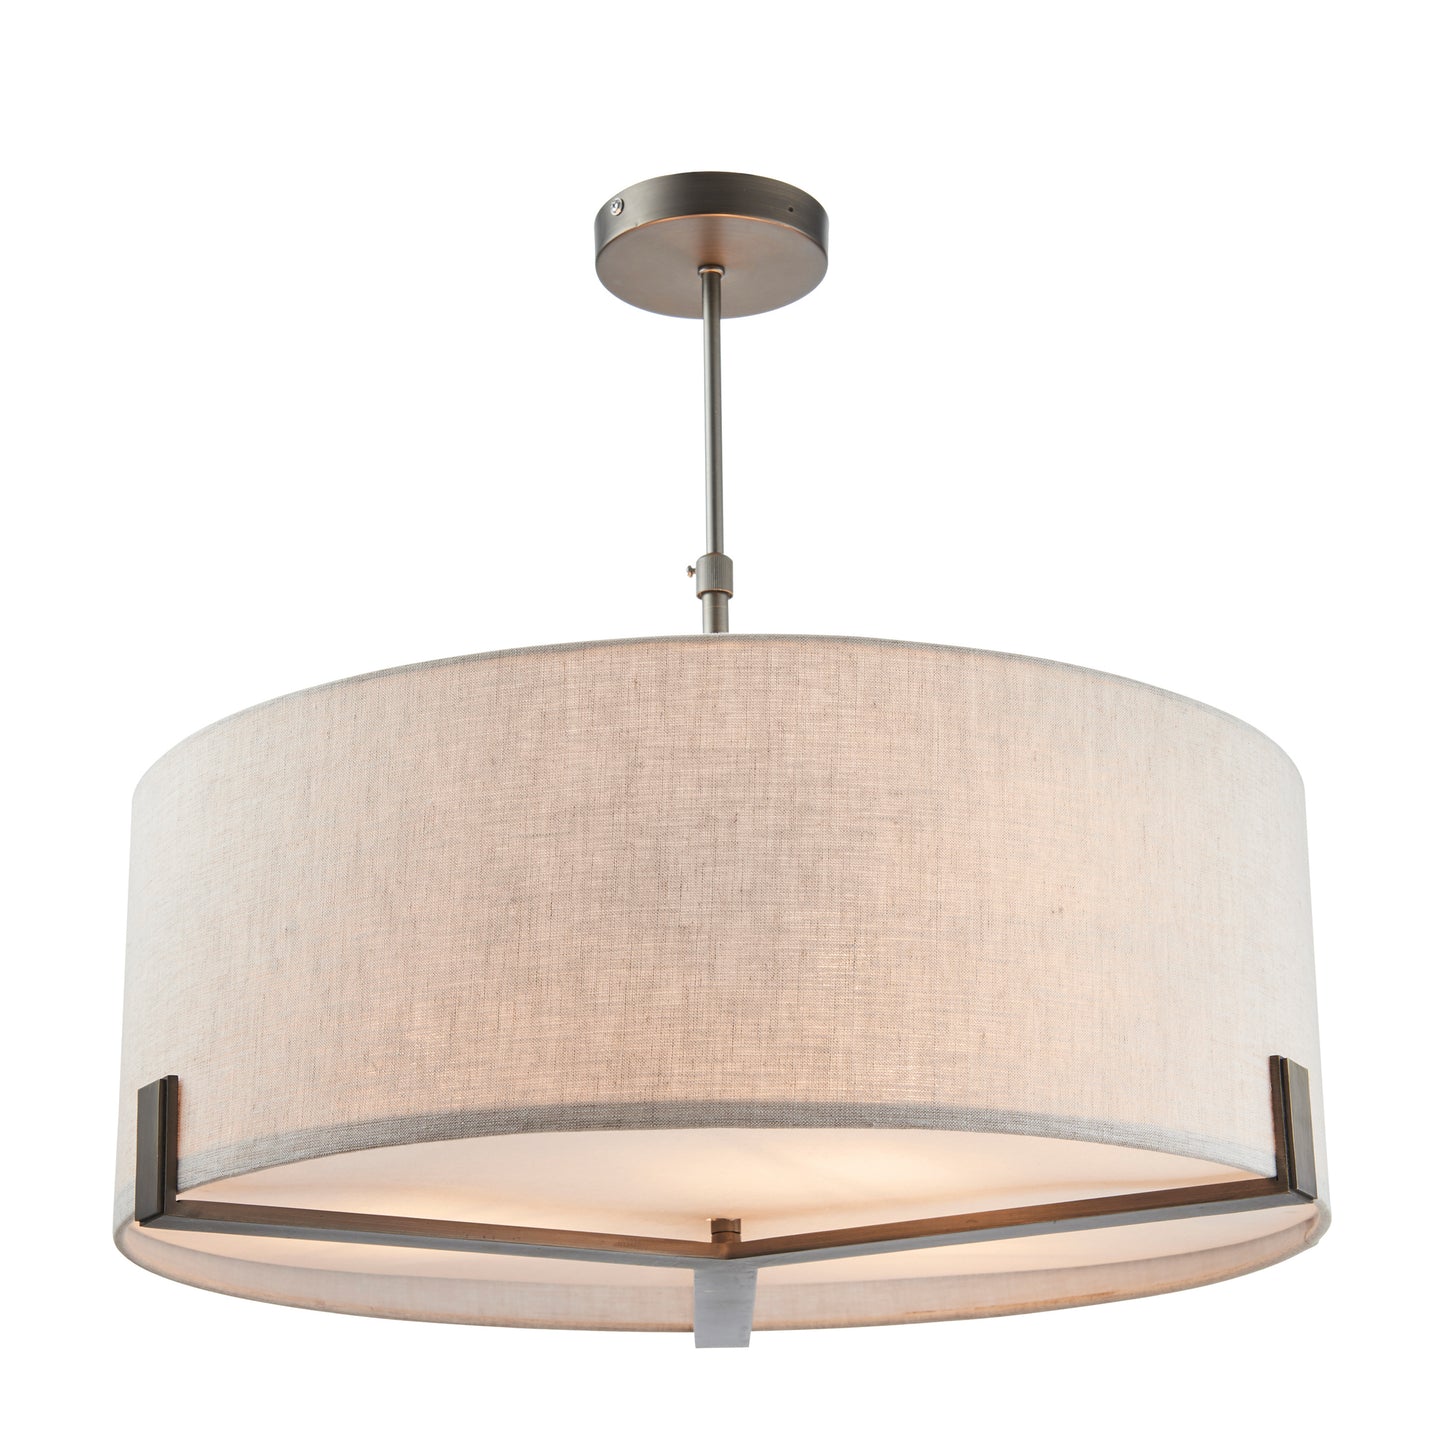 A Hayfield Pendant Light in Bronze/Natural, a stylish addition to your home's interior decor.